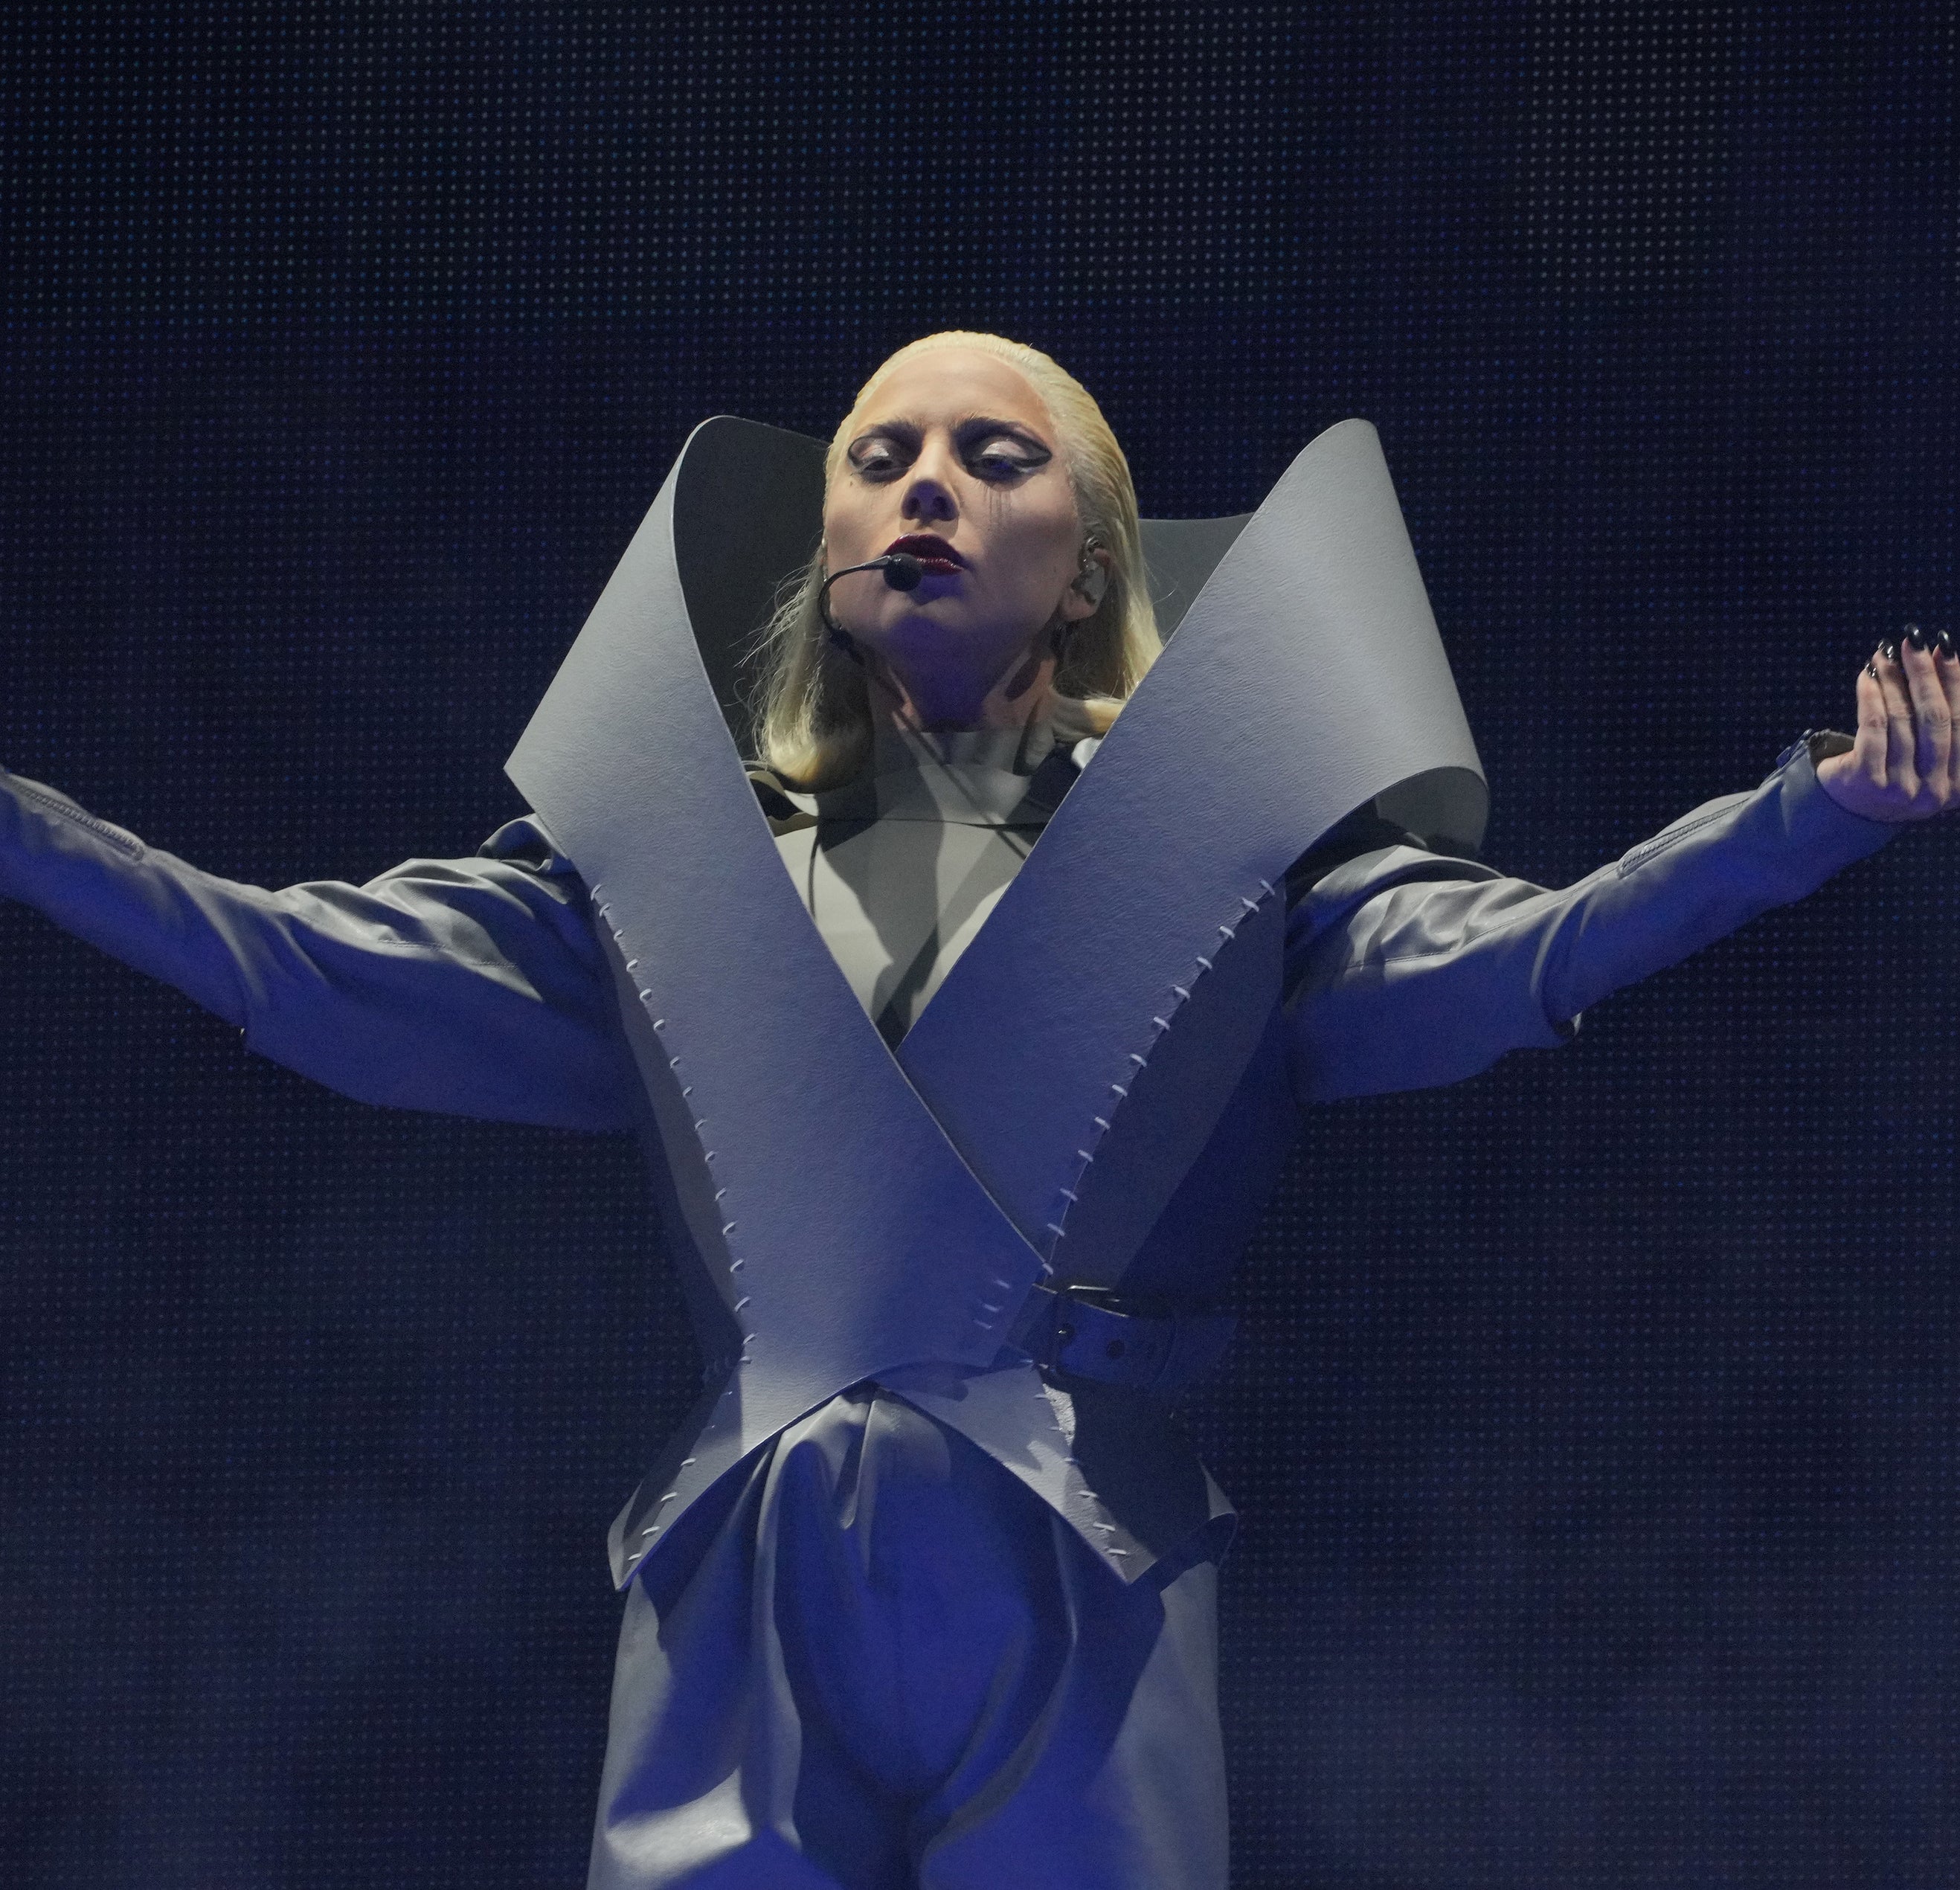 Lady Gaga is on stage, wearing an avant-garde, structured outfit with dramatic, oversized shoulders and striking poses during a performance